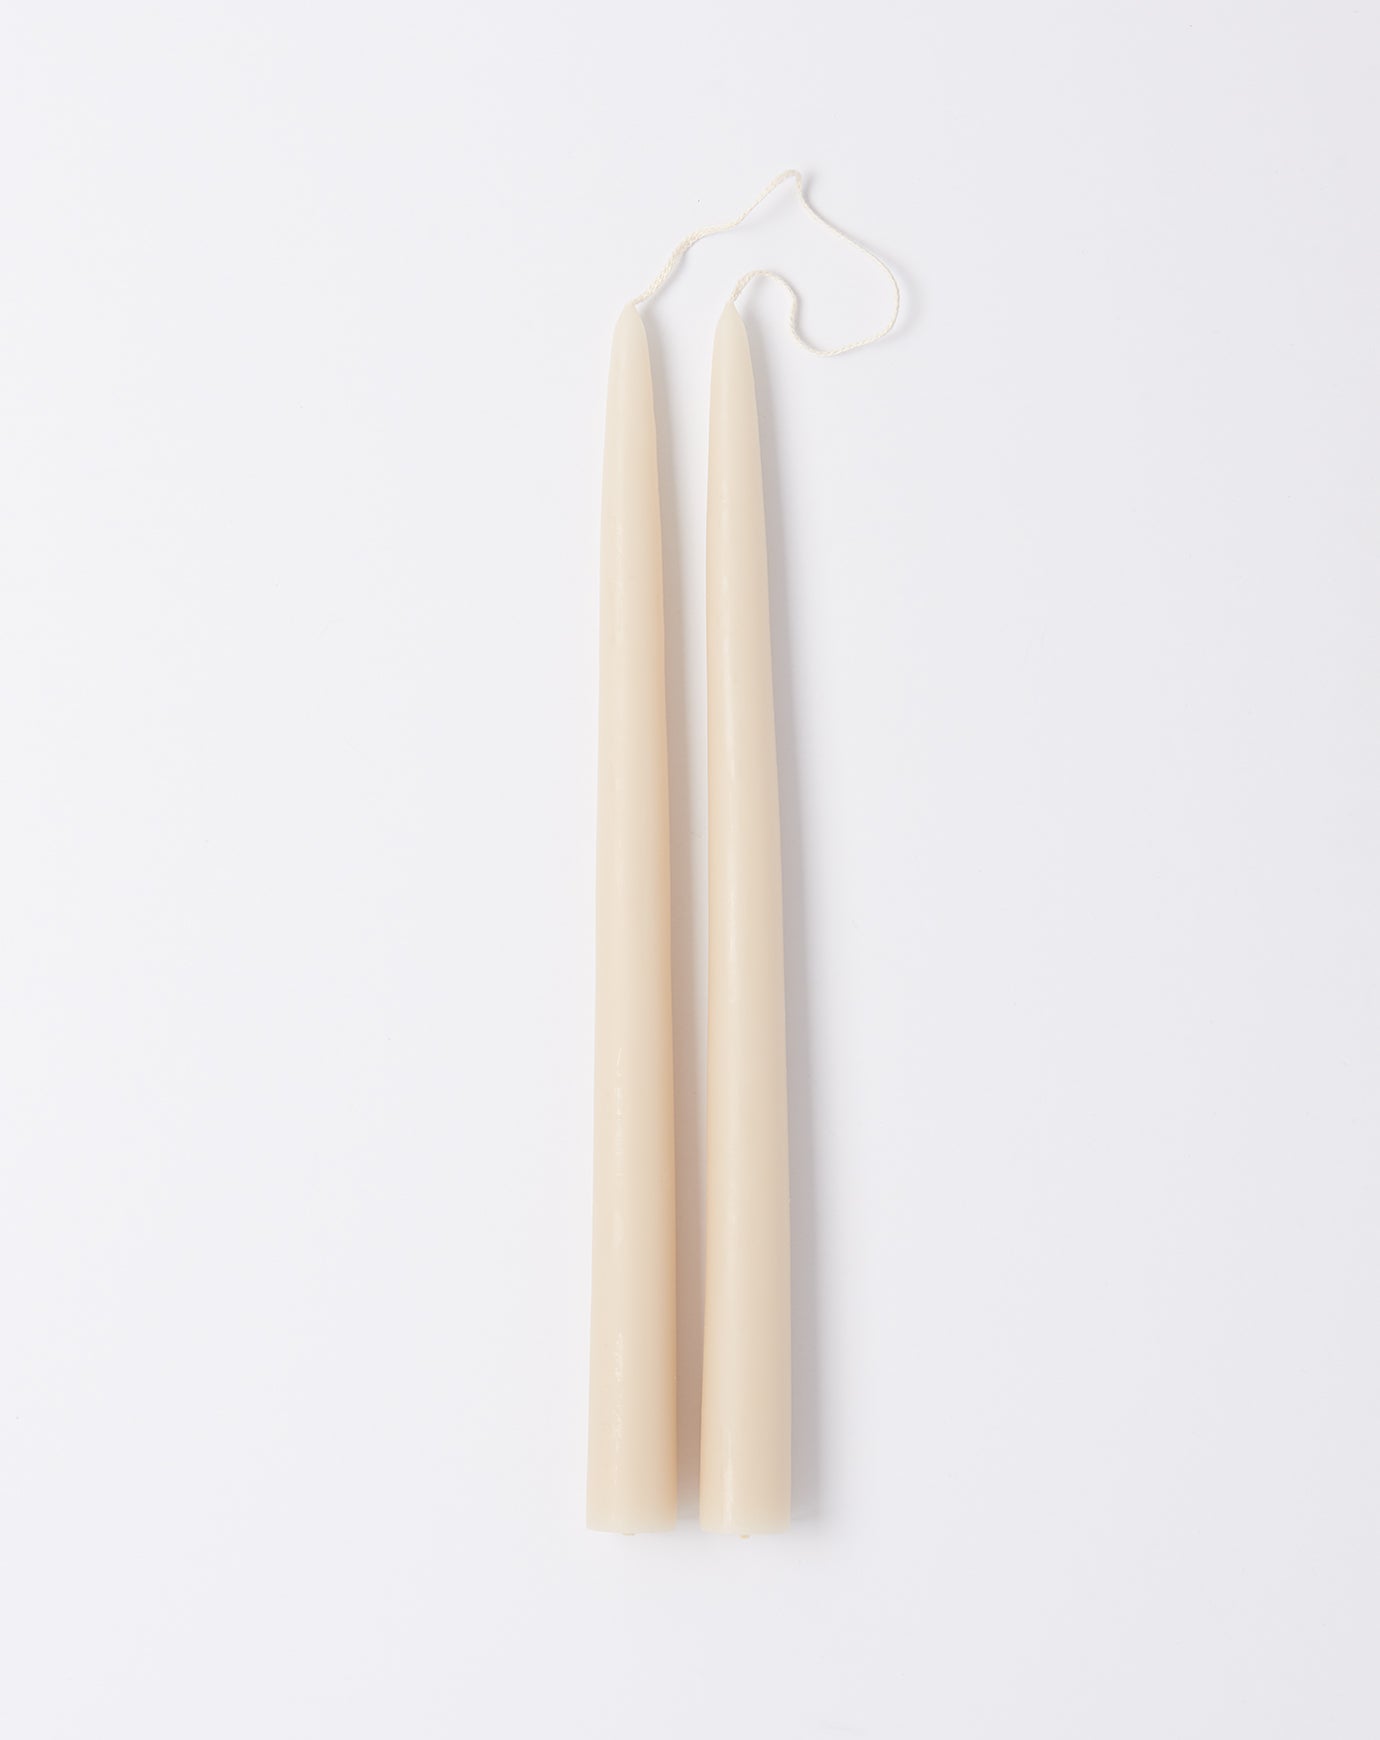 The Floral Society Pair of 12" Taper Candles in Parchment